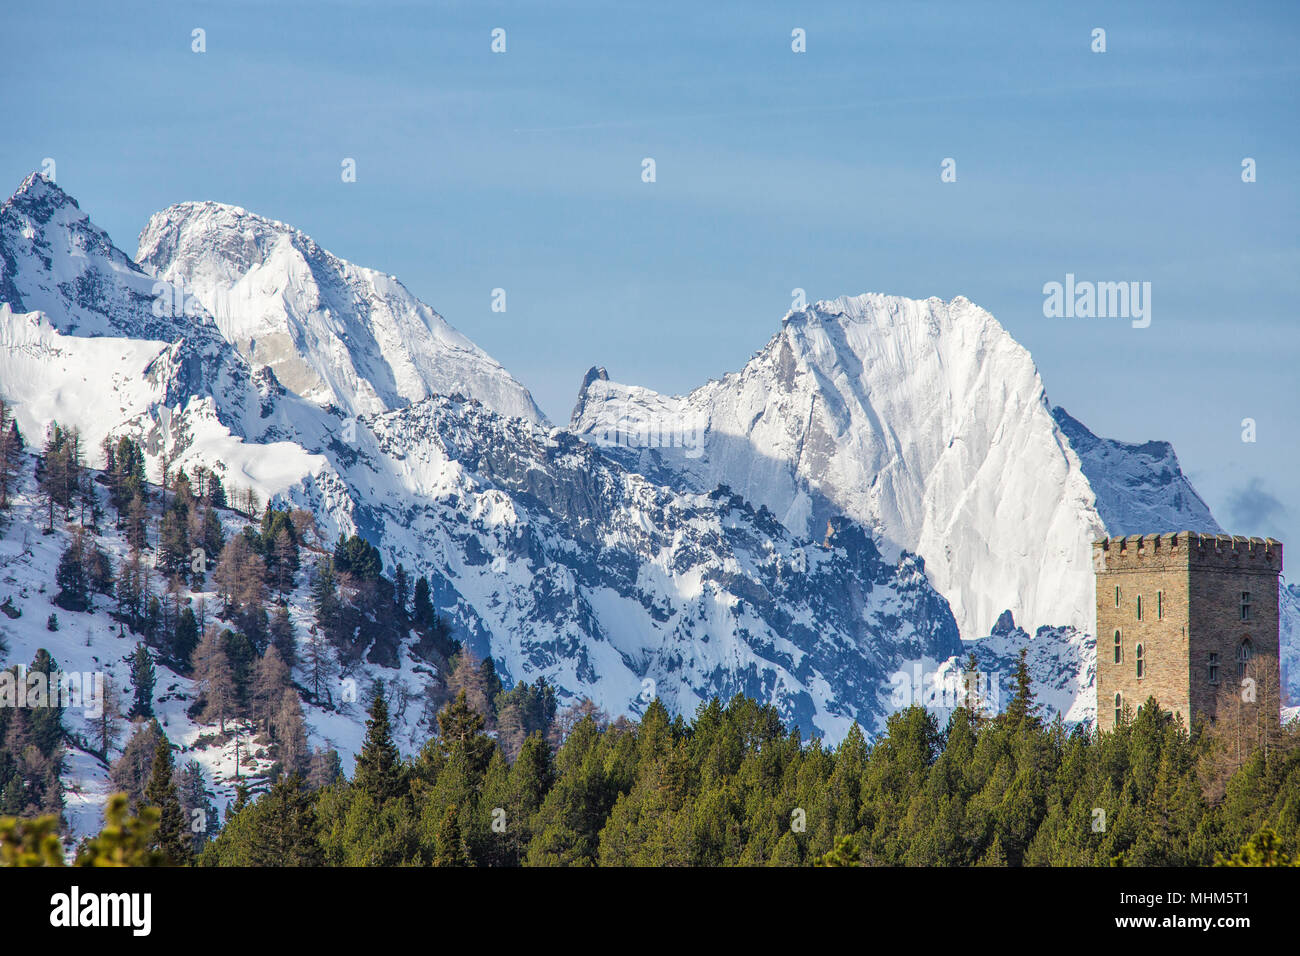 The Belvedere Tower frames the snowy peaks and Peak Badile on a spring day Maloja Pass Canton of Graubunden Switzerland Europe Stock Photo